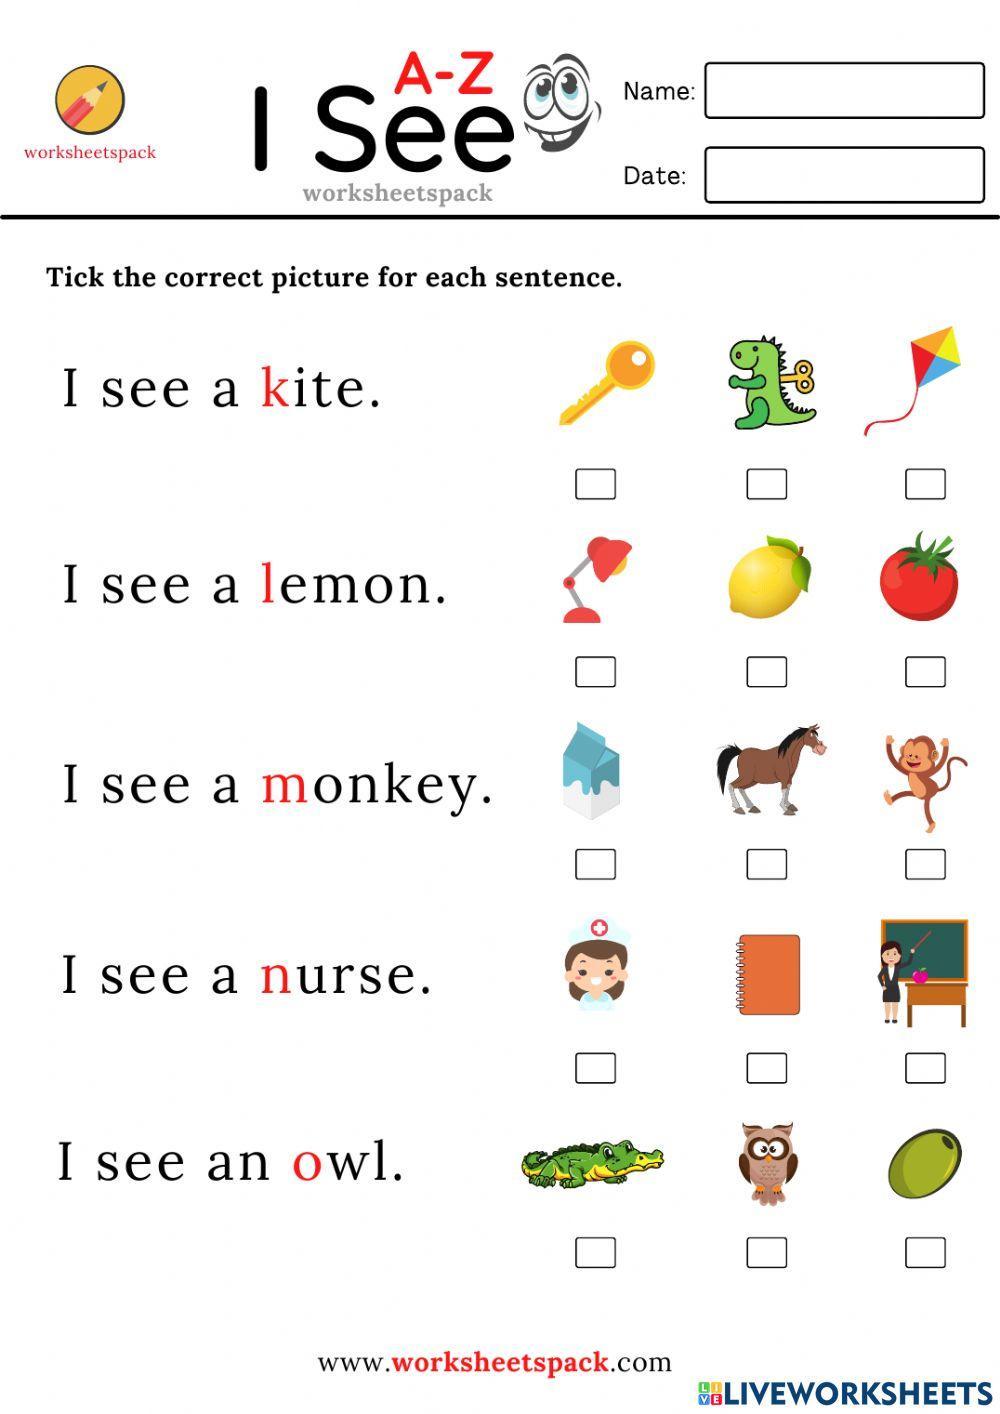 I see sentences A to Z worksheets